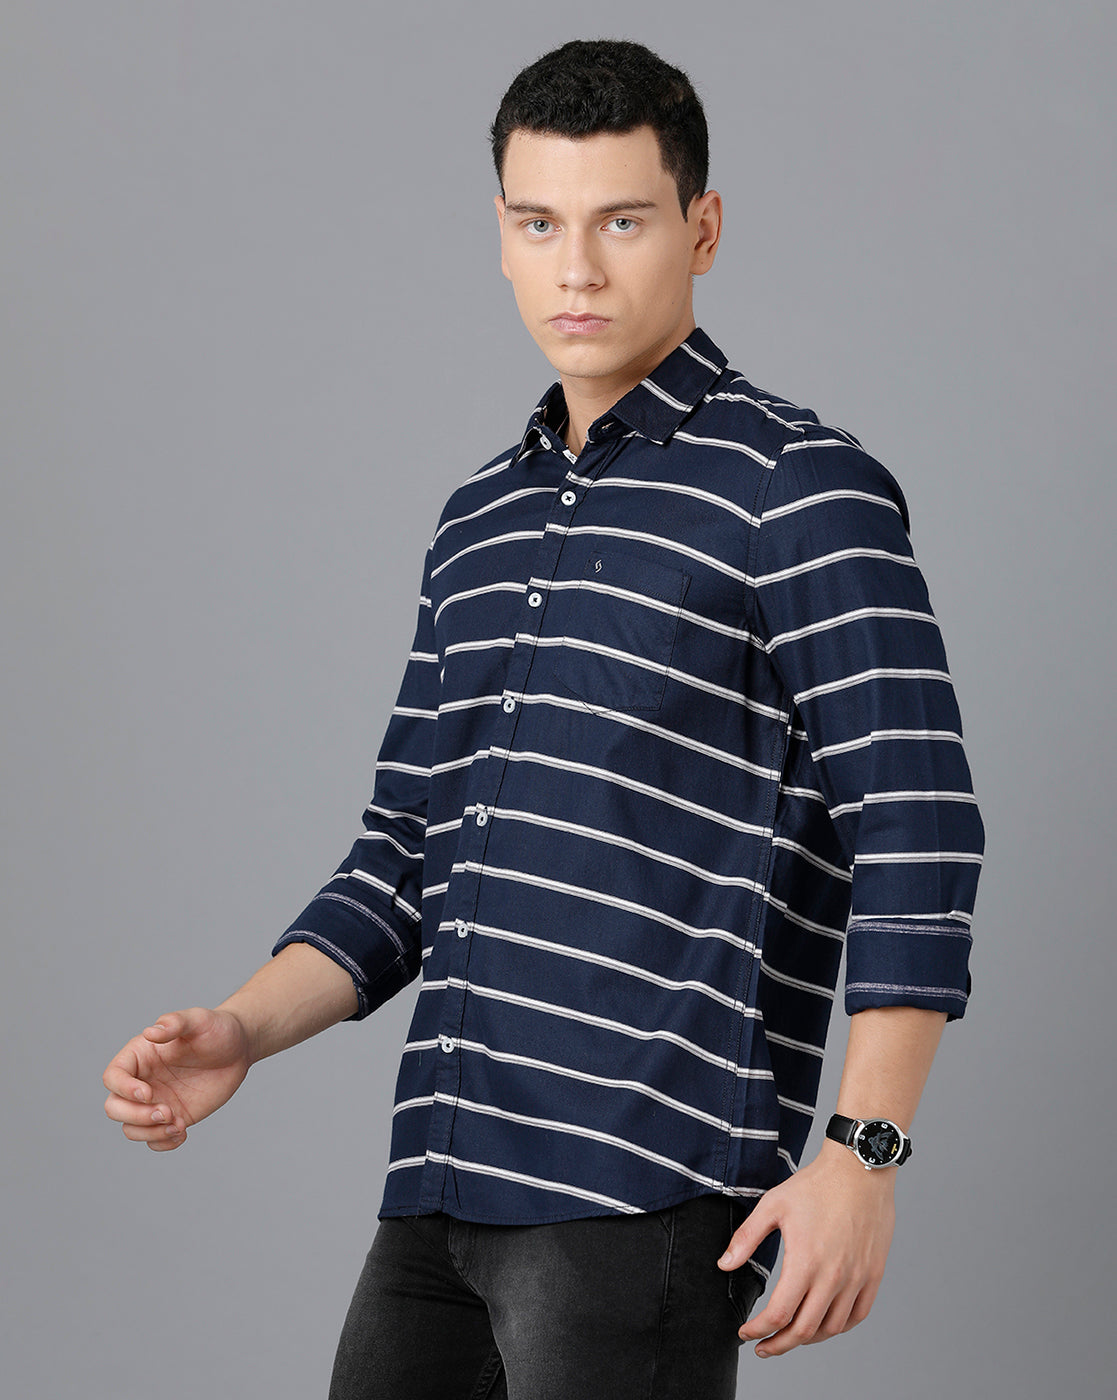 Classic Polo Mens Cotton Full Sleeve Striped Slim Fit Blue Color Spread Collar Woven Shirt | Sn2-49 D